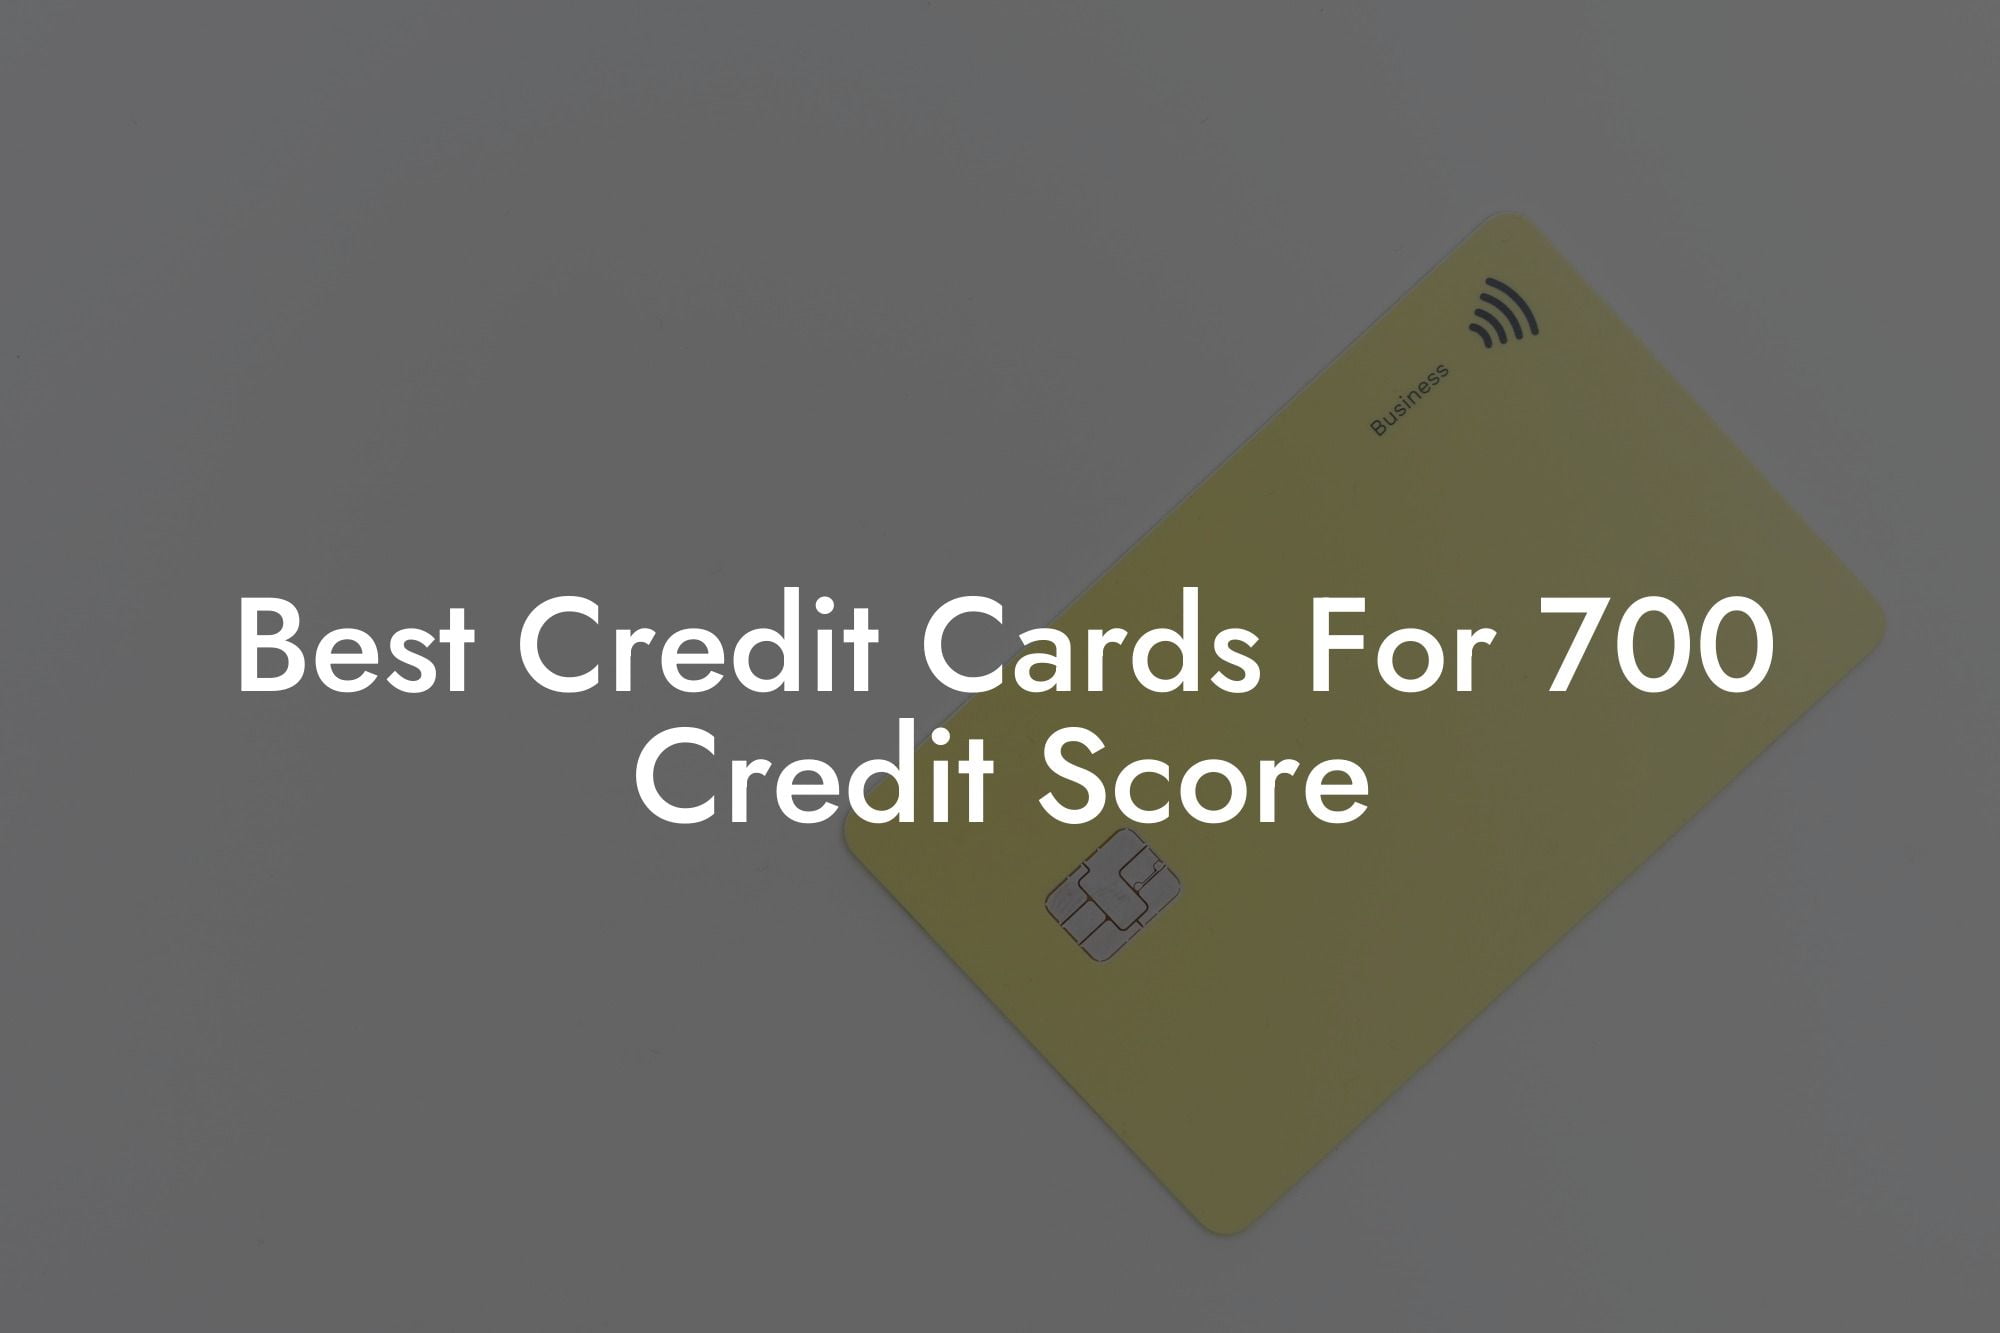 Best Credit Cards For 700 Credit Score